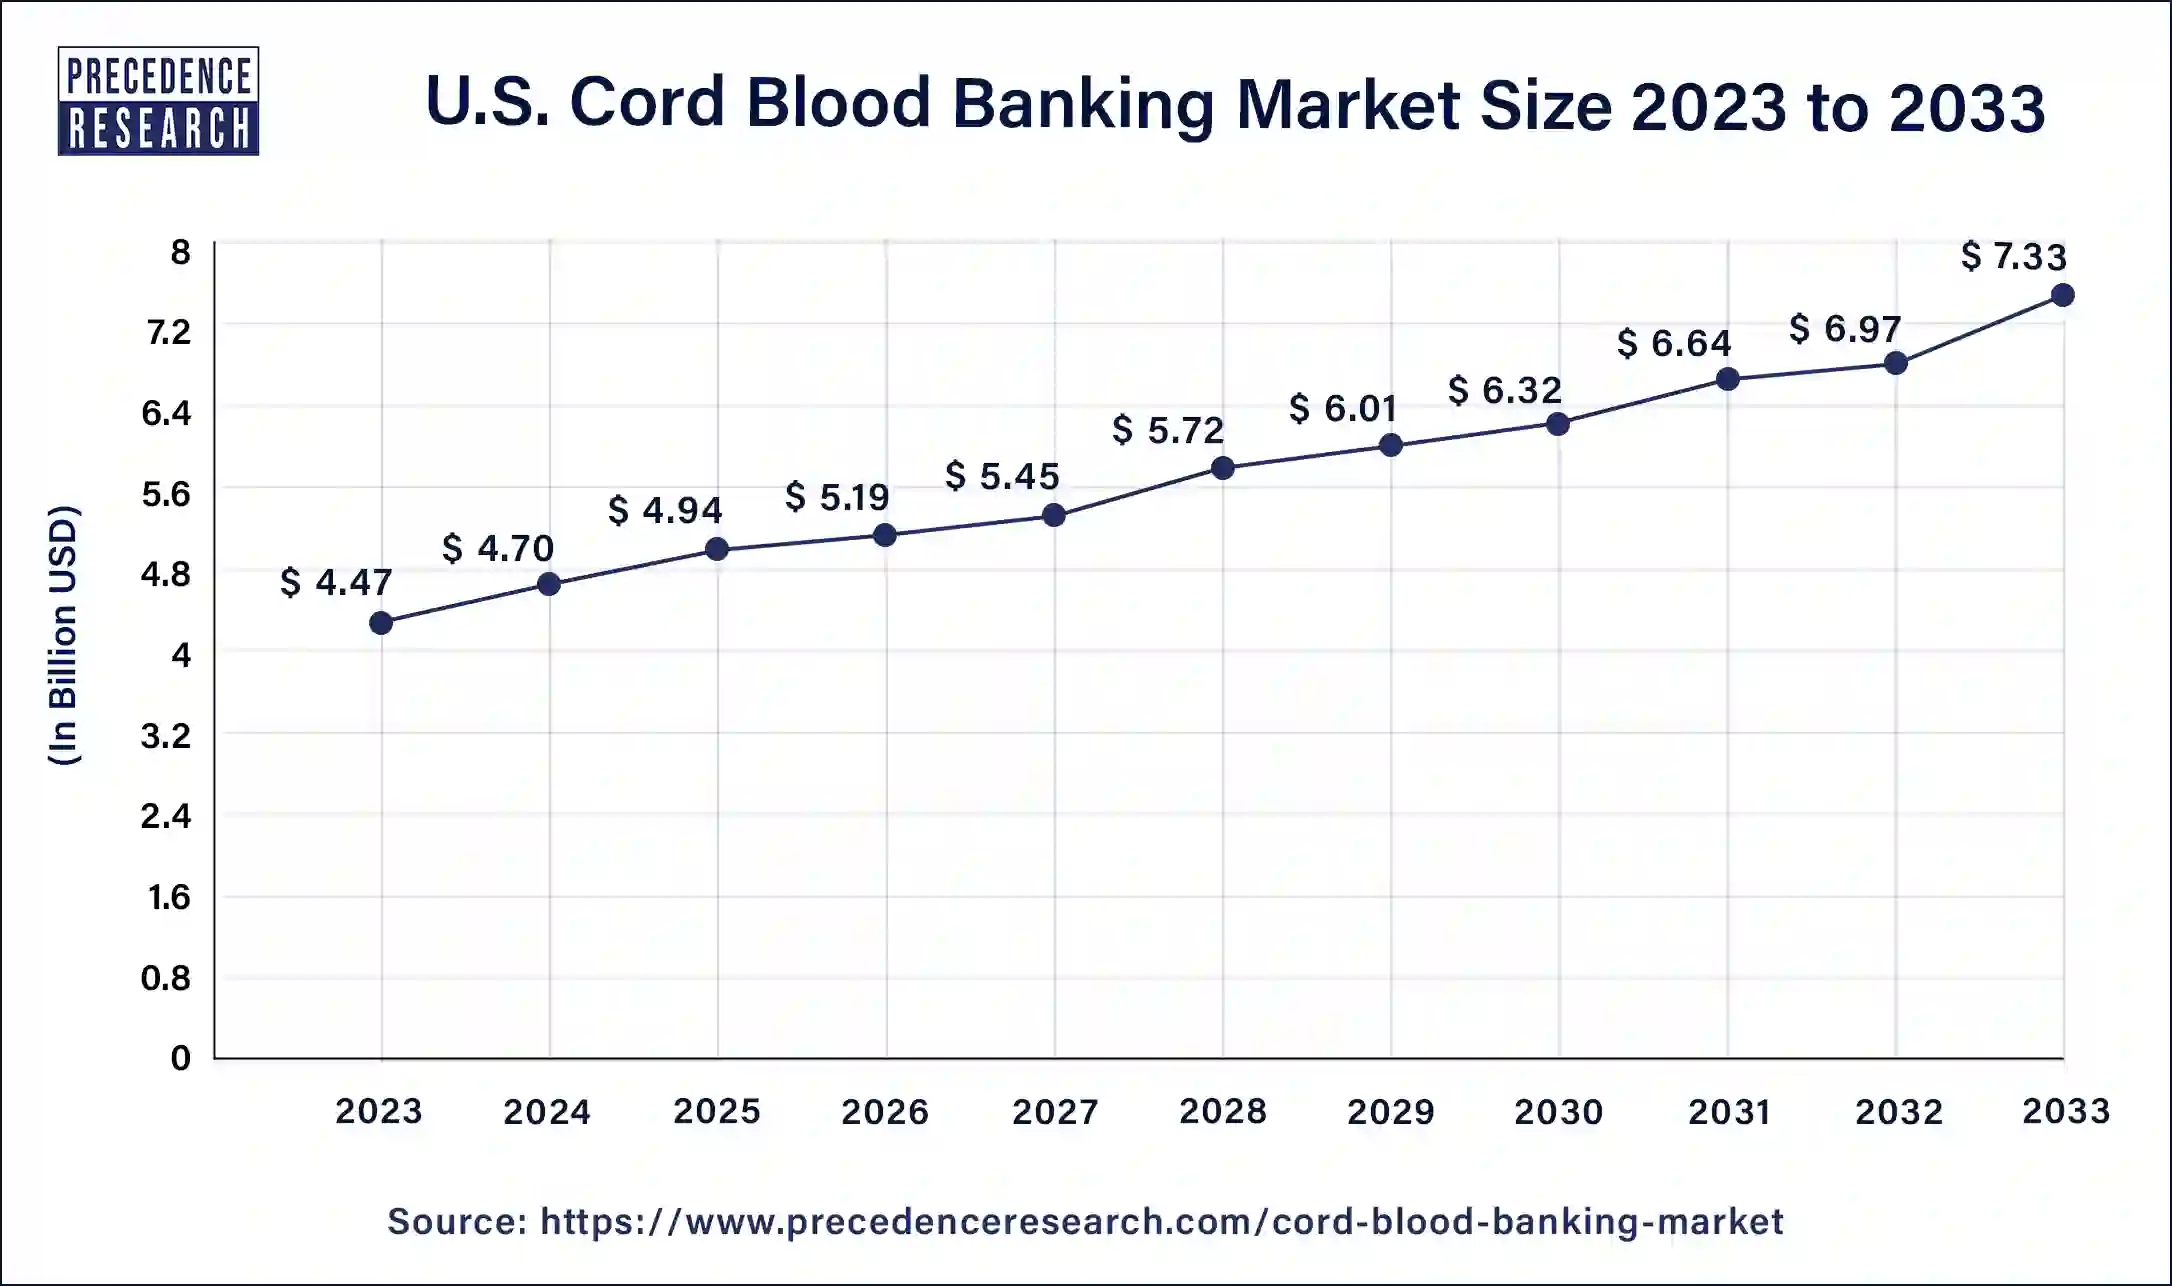 U.S. Cord Blood Banking Market Size 2024 to 2033